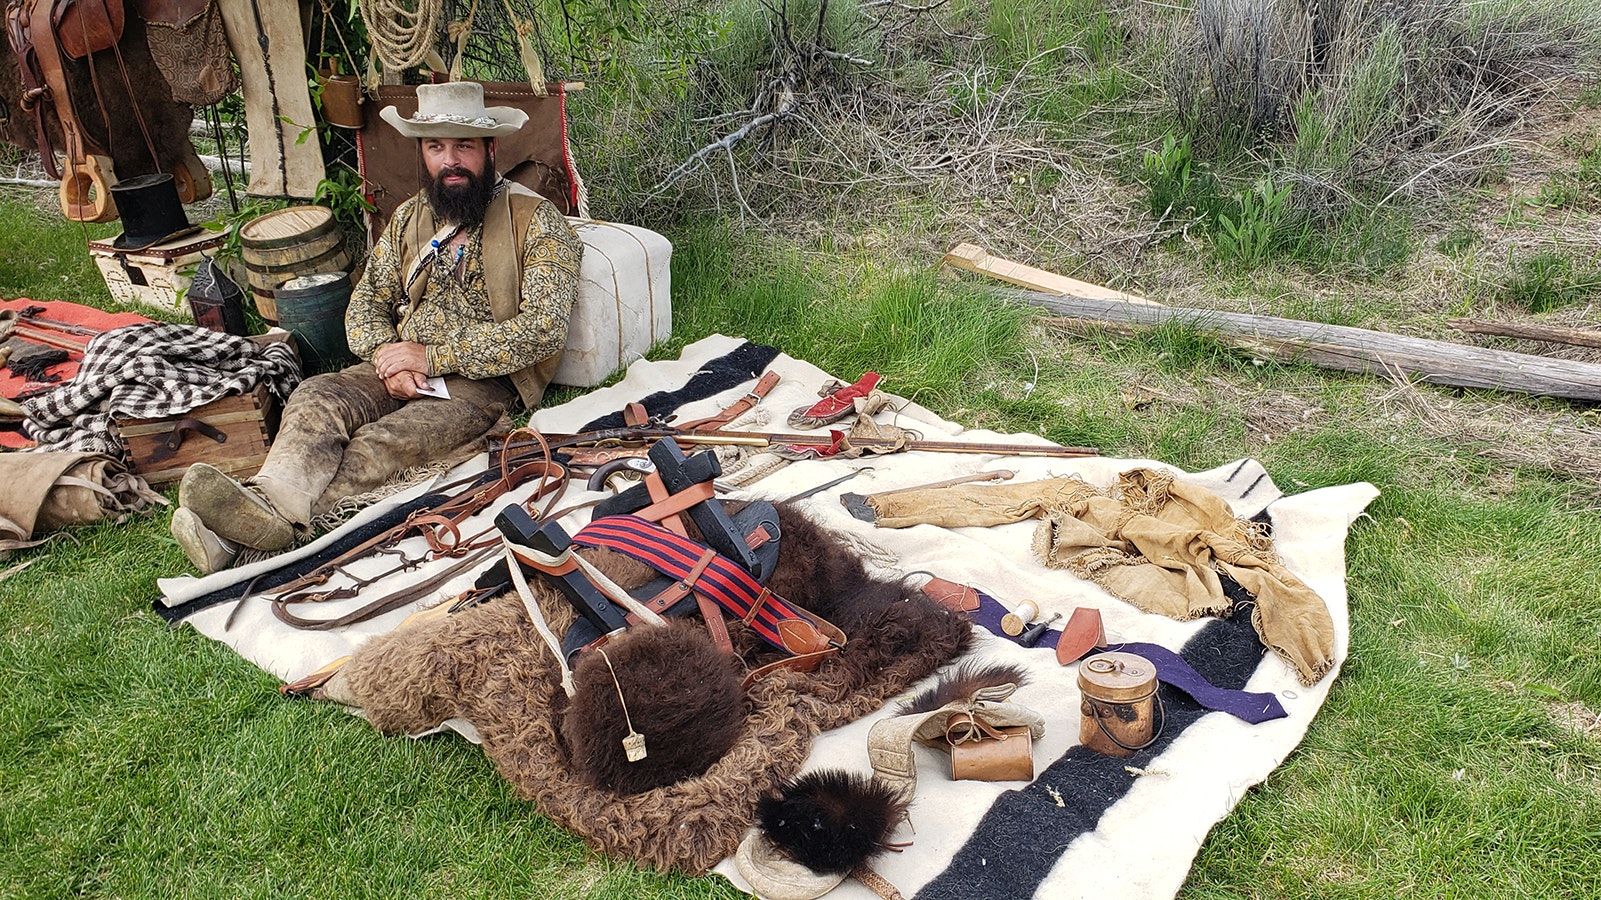 Garrett MacAdams portrays a mobile mountain man camp for a hunter during the recent Green River Rendezvous. Everything shown would easily fit on one horse.